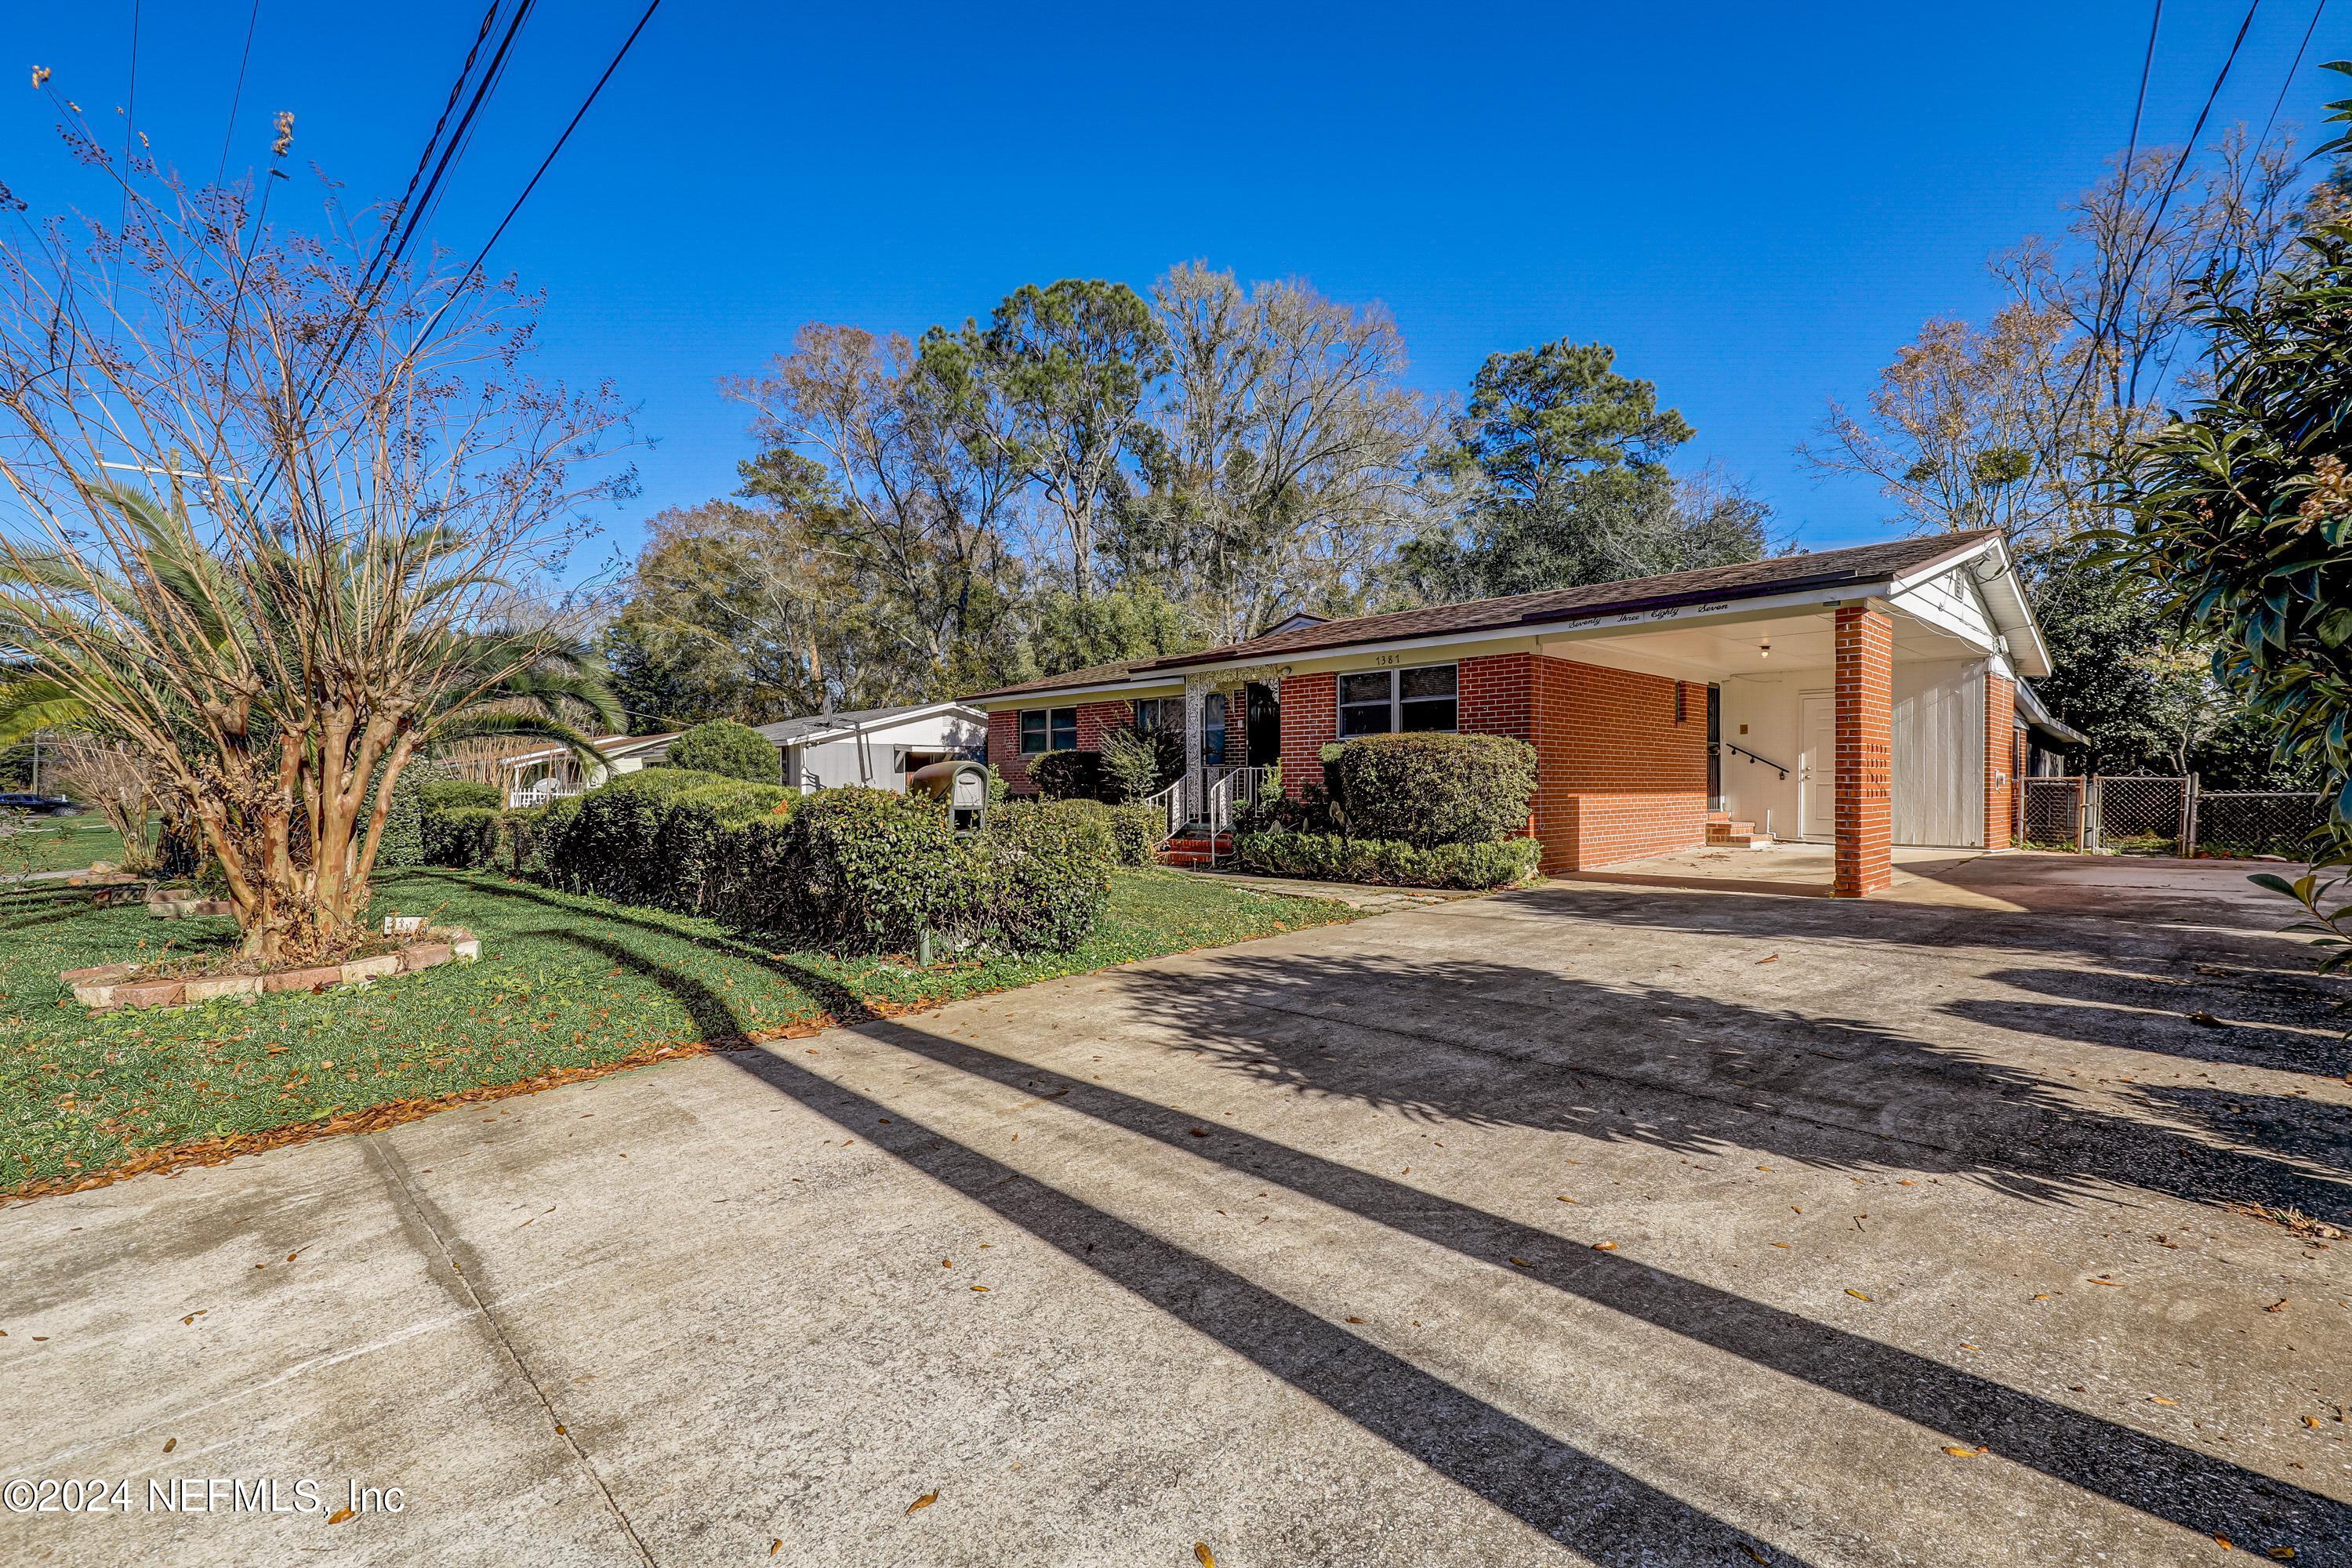 Jacksonville, FL home for sale located at 7387 DOSTIE Drive E, Jacksonville, FL 32209